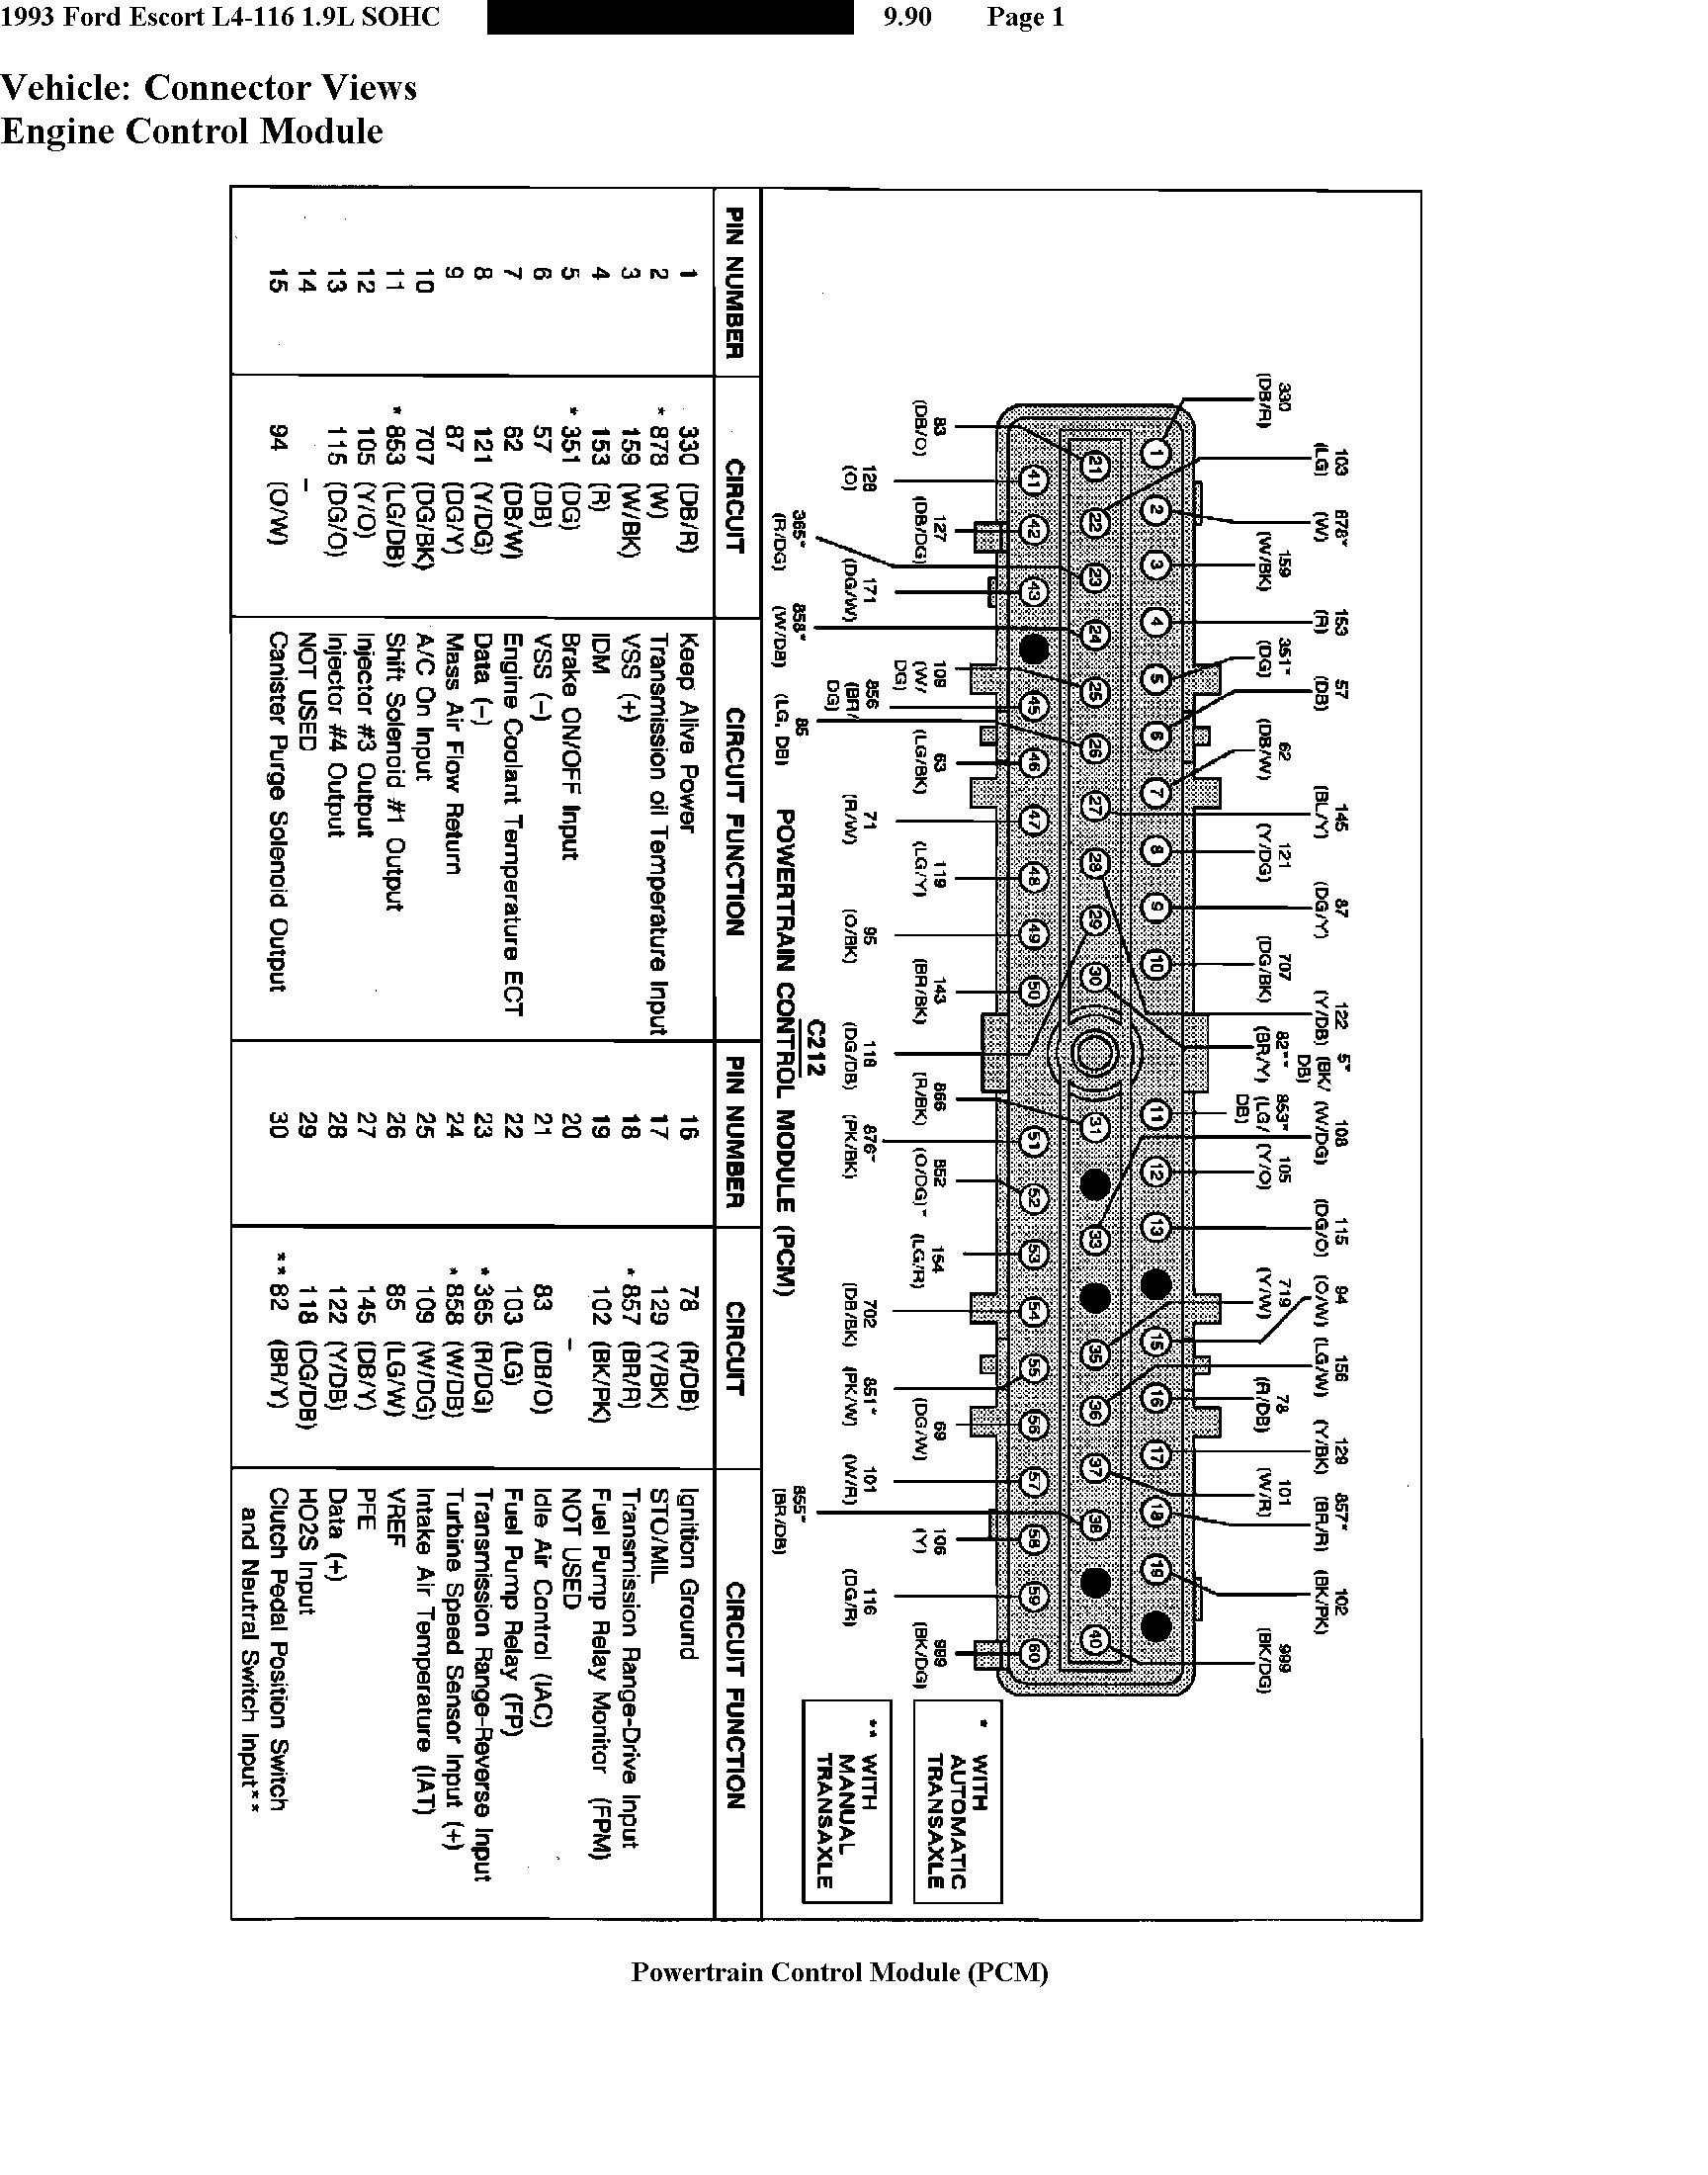 2001 Ford Mustang Wiring Diagram from ecomodder.com